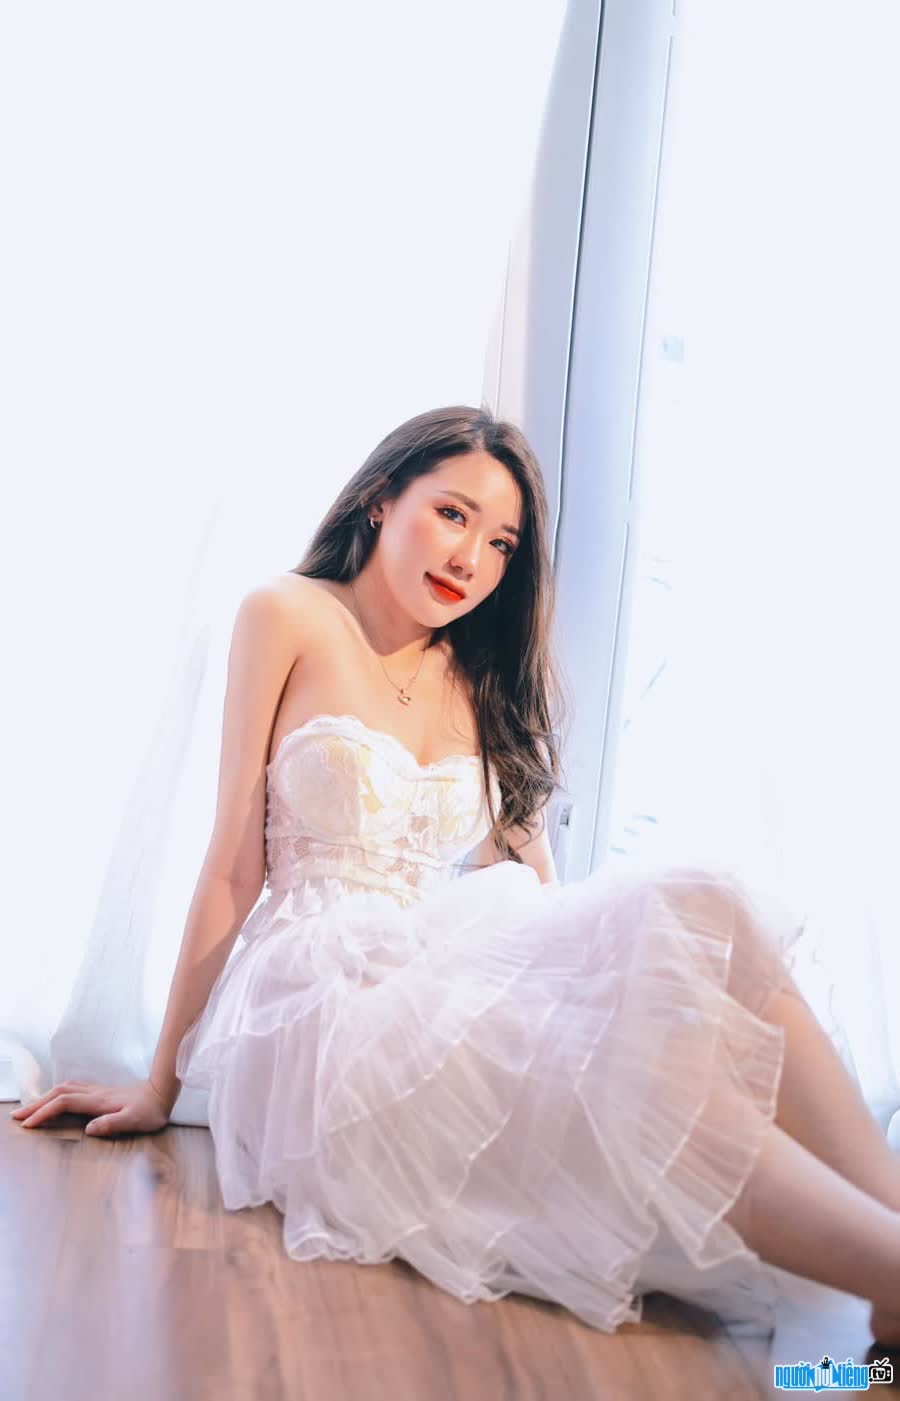 Ngoc Minh owns a beautiful and charming beauty